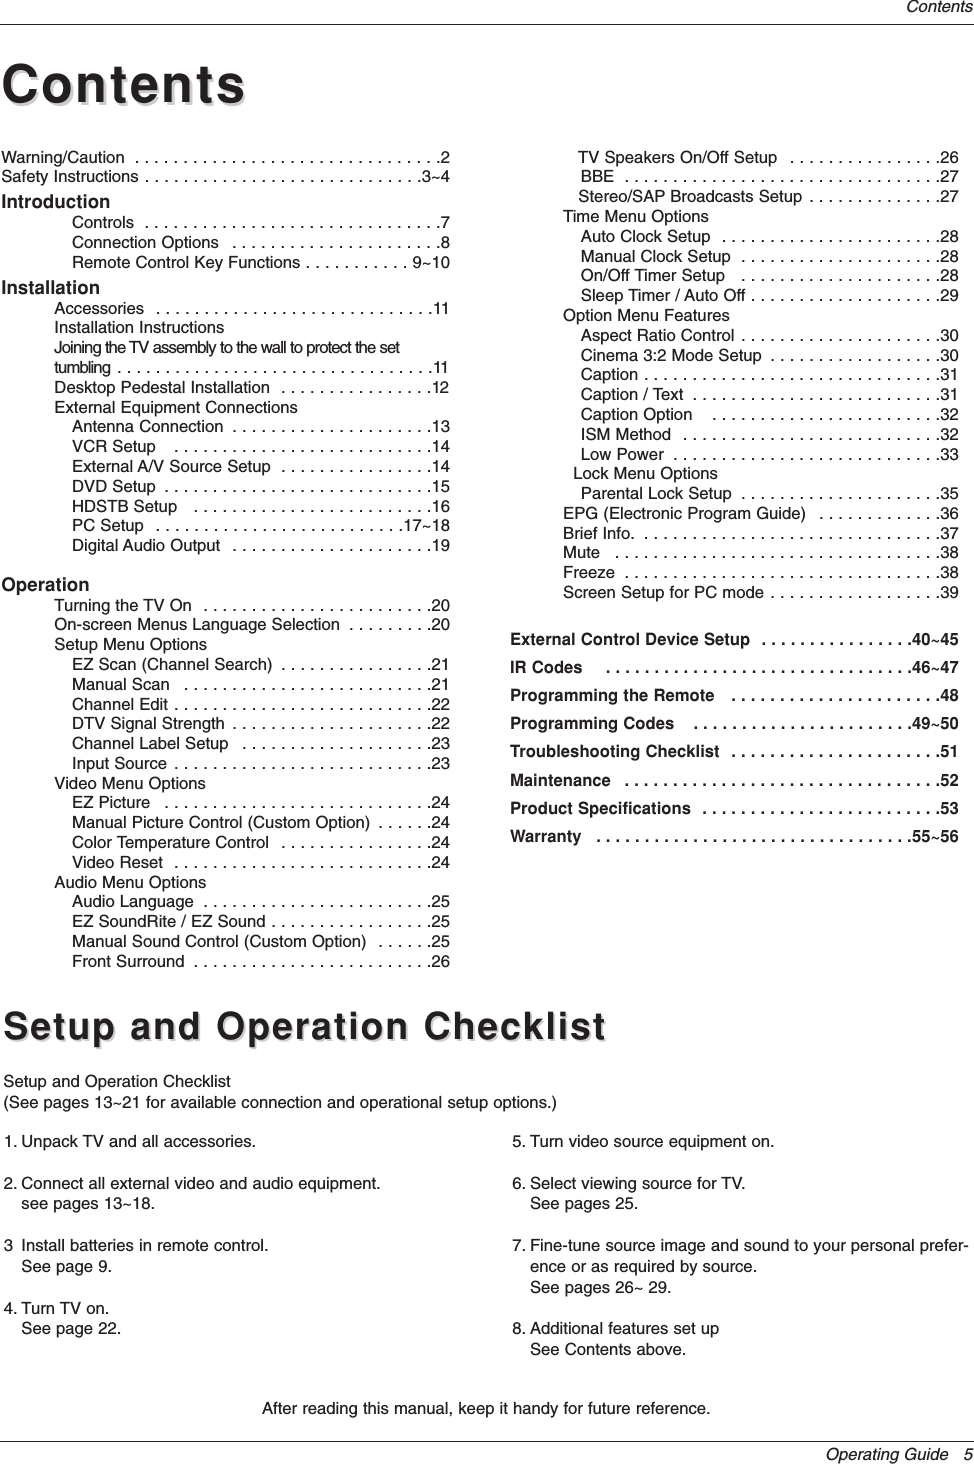 Operating Guide   5ContentsAfter reading this manual, keep it handy for future reference.Warning/Caution  . . . . . . . . . . . . . . . . . . . . . . . . . . . . . . . .2Safety Instructions . . . . . . . . . . . . . . . . . . . . . . . . . . . . .3~4IntroductionControls  . . . . . . . . . . . . . . . . . . . . . . . . . . . . . . .7Connection Options  . . . . . . . . . . . . . . . . . . . . . .8Remote Control Key Functions . . . . . . . . . . . 9~10InstallationAccessories  . . . . . . . . . . . . . . . . . . . . . . . . . . . . .11Installation InstructionsJoining the TV assembly to the wall to protect the set tumbling . . . . . . . . . . . . . . . . . . . . . . . . . . . . . . . . .11Desktop Pedestal Installation  . . . . . . . . . . . . . . . .12External Equipment ConnectionsAntenna Connection  . . . . . . . . . . . . . . . . . . . . .13VCR Setup   . . . . . . . . . . . . . . . . . . . . . . . . . . .14External A/V Source Setup  . . . . . . . . . . . . . . . .14DVD Setup  . . . . . . . . . . . . . . . . . . . . . . . . . . . .15HDSTB Setup   . . . . . . . . . . . . . . . . . . . . . . . . .16PC Setup  . . . . . . . . . . . . . . . . . . . . . . . . . .17~18Digital Audio Output  . . . . . . . . . . . . . . . . . . . . .19OperationTurning the TV On  . . . . . . . . . . . . . . . . . . . . . . . .20On-screen Menus Language Selection  . . . . . . . . .20Setup Menu OptionsEZ Scan (Channel Search)  . . . . . . . . . . . . . . . .21Manual Scan   . . . . . . . . . . . . . . . . . . . . . . . . . .21Channel Edit . . . . . . . . . . . . . . . . . . . . . . . . . . .22DTV Signal Strength  . . . . . . . . . . . . . . . . . . . . .22Channel Label Setup  . . . . . . . . . . . . . . . . . . . .23Input Source . . . . . . . . . . . . . . . . . . . . . . . . . . .23Video Menu OptionsEZ Picture  . . . . . . . . . . . . . . . . . . . . . . . . . . . .24Manual Picture Control (Custom Option)  . . . . . .24Color Temperature Control  . . . . . . . . . . . . . . . .24Video Reset  . . . . . . . . . . . . . . . . . . . . . . . . . . .24Audio Menu OptionsAudio Language  . . . . . . . . . . . . . . . . . . . . . . . .25EZ SoundRite / EZ Sound . . . . . . . . . . . . . . . . .25Manual Sound Control (Custom Option)  . . . . . .25Front Surround  . . . . . . . . . . . . . . . . . . . . . . . . .26TV Speakers On/Off Setup  . . . . . . . . . . . . . . . .26BBE  . . . . . . . . . . . . . . . . . . . . . . . . . . . . . . . . .27Stereo/SAP Broadcasts Setup . . . . . . . . . . . . . .27Time Menu OptionsAuto Clock Setup  . . . . . . . . . . . . . . . . . . . . . . .28Manual Clock Setup  . . . . . . . . . . . . . . . . . . . . .28On/Off Timer Setup   . . . . . . . . . . . . . . . . . . . . .28Sleep Timer / Auto Off . . . . . . . . . . . . . . . . . . . .29Option Menu FeaturesAspect Ratio Control . . . . . . . . . . . . . . . . . . . . .30Cinema 3:2 Mode Setup  . . . . . . . . . . . . . . . . . .30Caption . . . . . . . . . . . . . . . . . . . . . . . . . . . . . . .31Caption / Text  . . . . . . . . . . . . . . . . . . . . . . . . . .31Caption Option   . . . . . . . . . . . . . . . . . . . . . . . .32ISM Method  . . . . . . . . . . . . . . . . . . . . . . . . . . .32Low Power  . . . . . . . . . . . . . . . . . . . . . . . . . . . .33Lock Menu OptionsParental Lock Setup  . . . . . . . . . . . . . . . . . . . . .35EPG (Electronic Program Guide)  . . . . . . . . . . . . .36Brief Info.  . . . . . . . . . . . . . . . . . . . . . . . . . . . . . . .37Mute  . . . . . . . . . . . . . . . . . . . . . . . . . . . . . . . . . .38Freeze  . . . . . . . . . . . . . . . . . . . . . . . . . . . . . . . . .38Screen Setup for PC mode . . . . . . . . . . . . . . . . . .39External Control Device Setup  . . . . . . . . . . . . . . . .40~45IR Codes    . . . . . . . . . . . . . . . . . . . . . . . . . . . . . . . .46~47Programming the Remote   . . . . . . . . . . . . . . . . . . . . . .48Programming Codes    . . . . . . . . . . . . . . . . . . . . . . .49~50Troubleshooting Checklist  . . . . . . . . . . . . . . . . . . . . . .51Maintenance  . . . . . . . . . . . . . . . . . . . . . . . . . . . . . . . . .52Product Specifications  . . . . . . . . . . . . . . . . . . . . . . . . .53Warranty   . . . . . . . . . . . . . . . . . . . . . . . . . . . . . . . . .55~56ContentsContentsSetup and Operation ChecklistSetup and Operation ChecklistSetup and Operation Checklist(See pages 13~21 for available connection and operational setup options.)1. Unpack TV and all accessories.2. Connect all external video and audio equipment.see pages 13~18.3 Install batteries in remote control.See page 9.4. Turn TV on.See page 22.5. Turn video source equipment on.6. Select viewing source for TV.See pages 25.7. Fine-tune source image and sound to your personal prefer-ence or as required by source. See pages 26~ 29.8. Additional features set upSee Contents above.